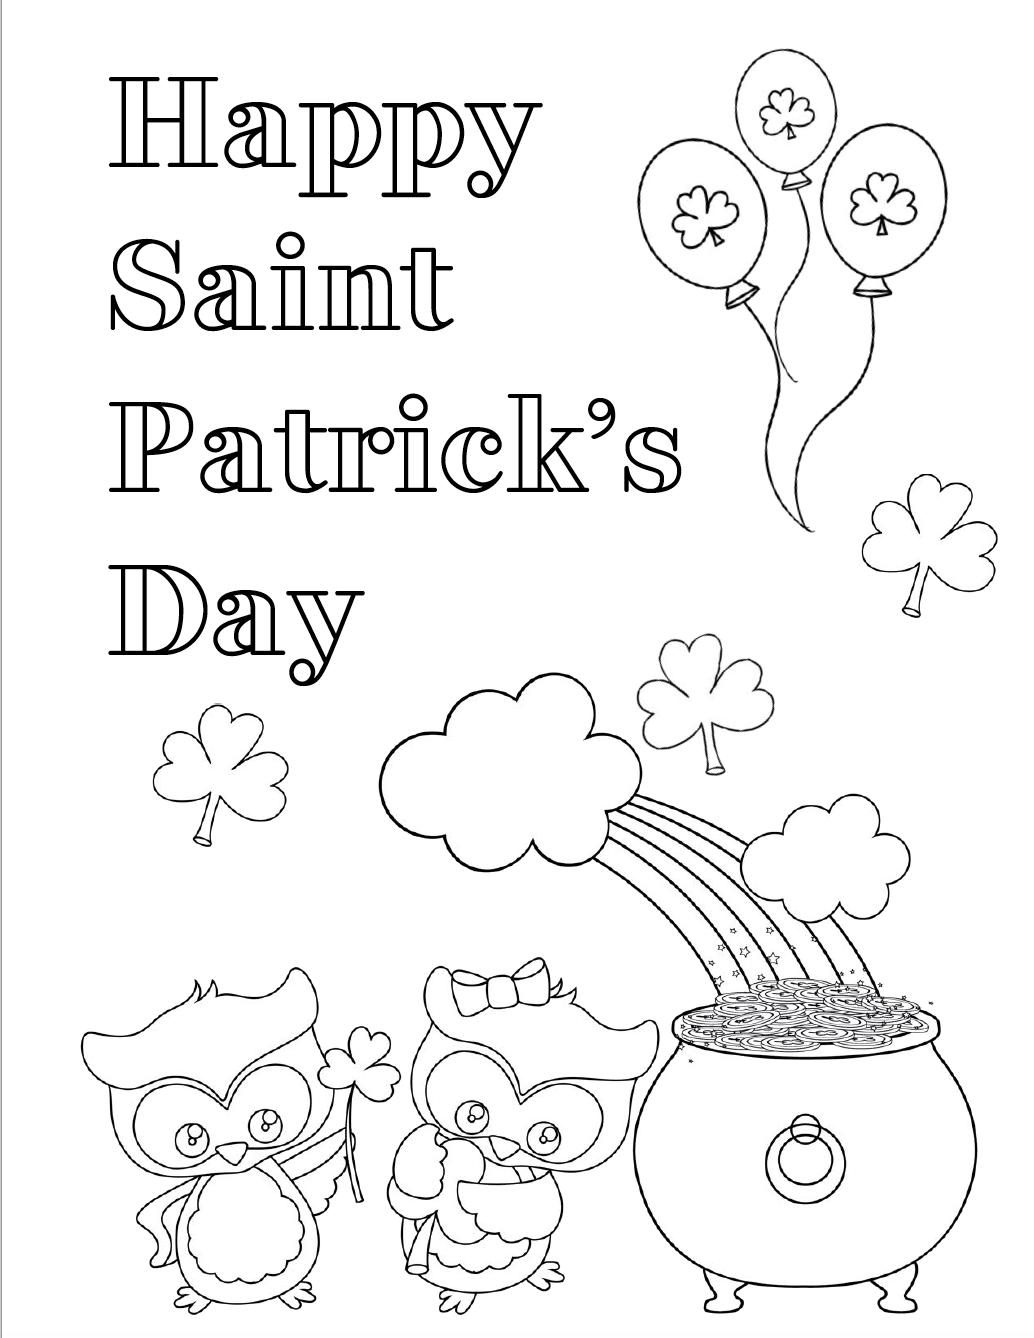 printable st patricks day coloring pages